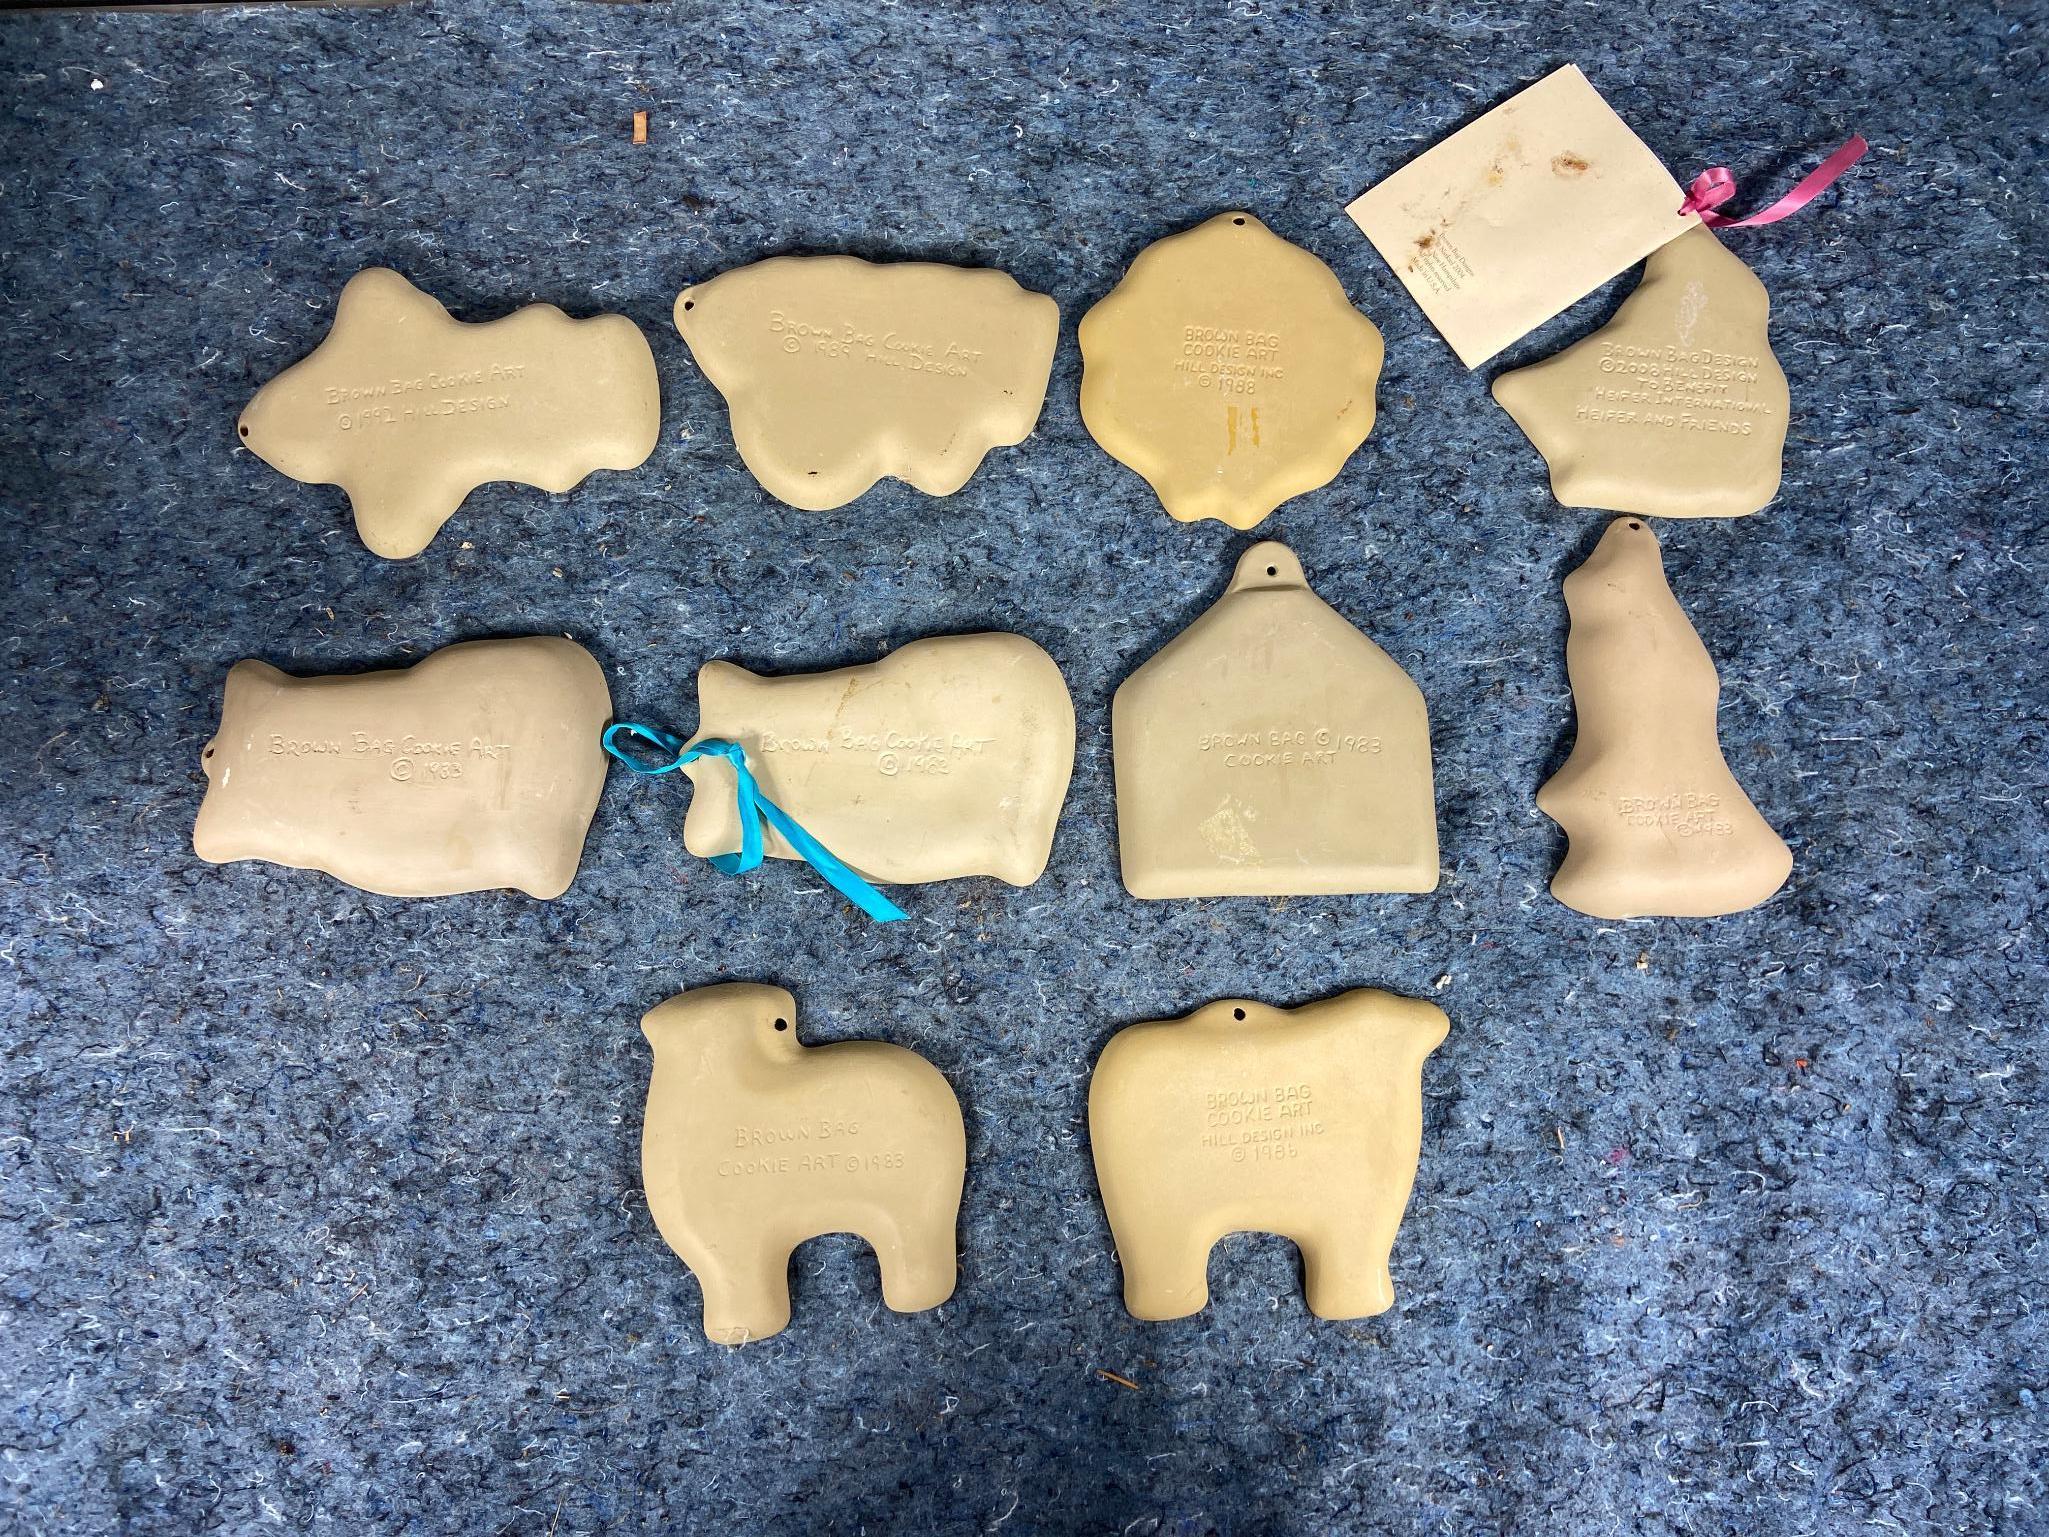 10 Vintage Cookie Molds including Sheep, Cow, Cat and More